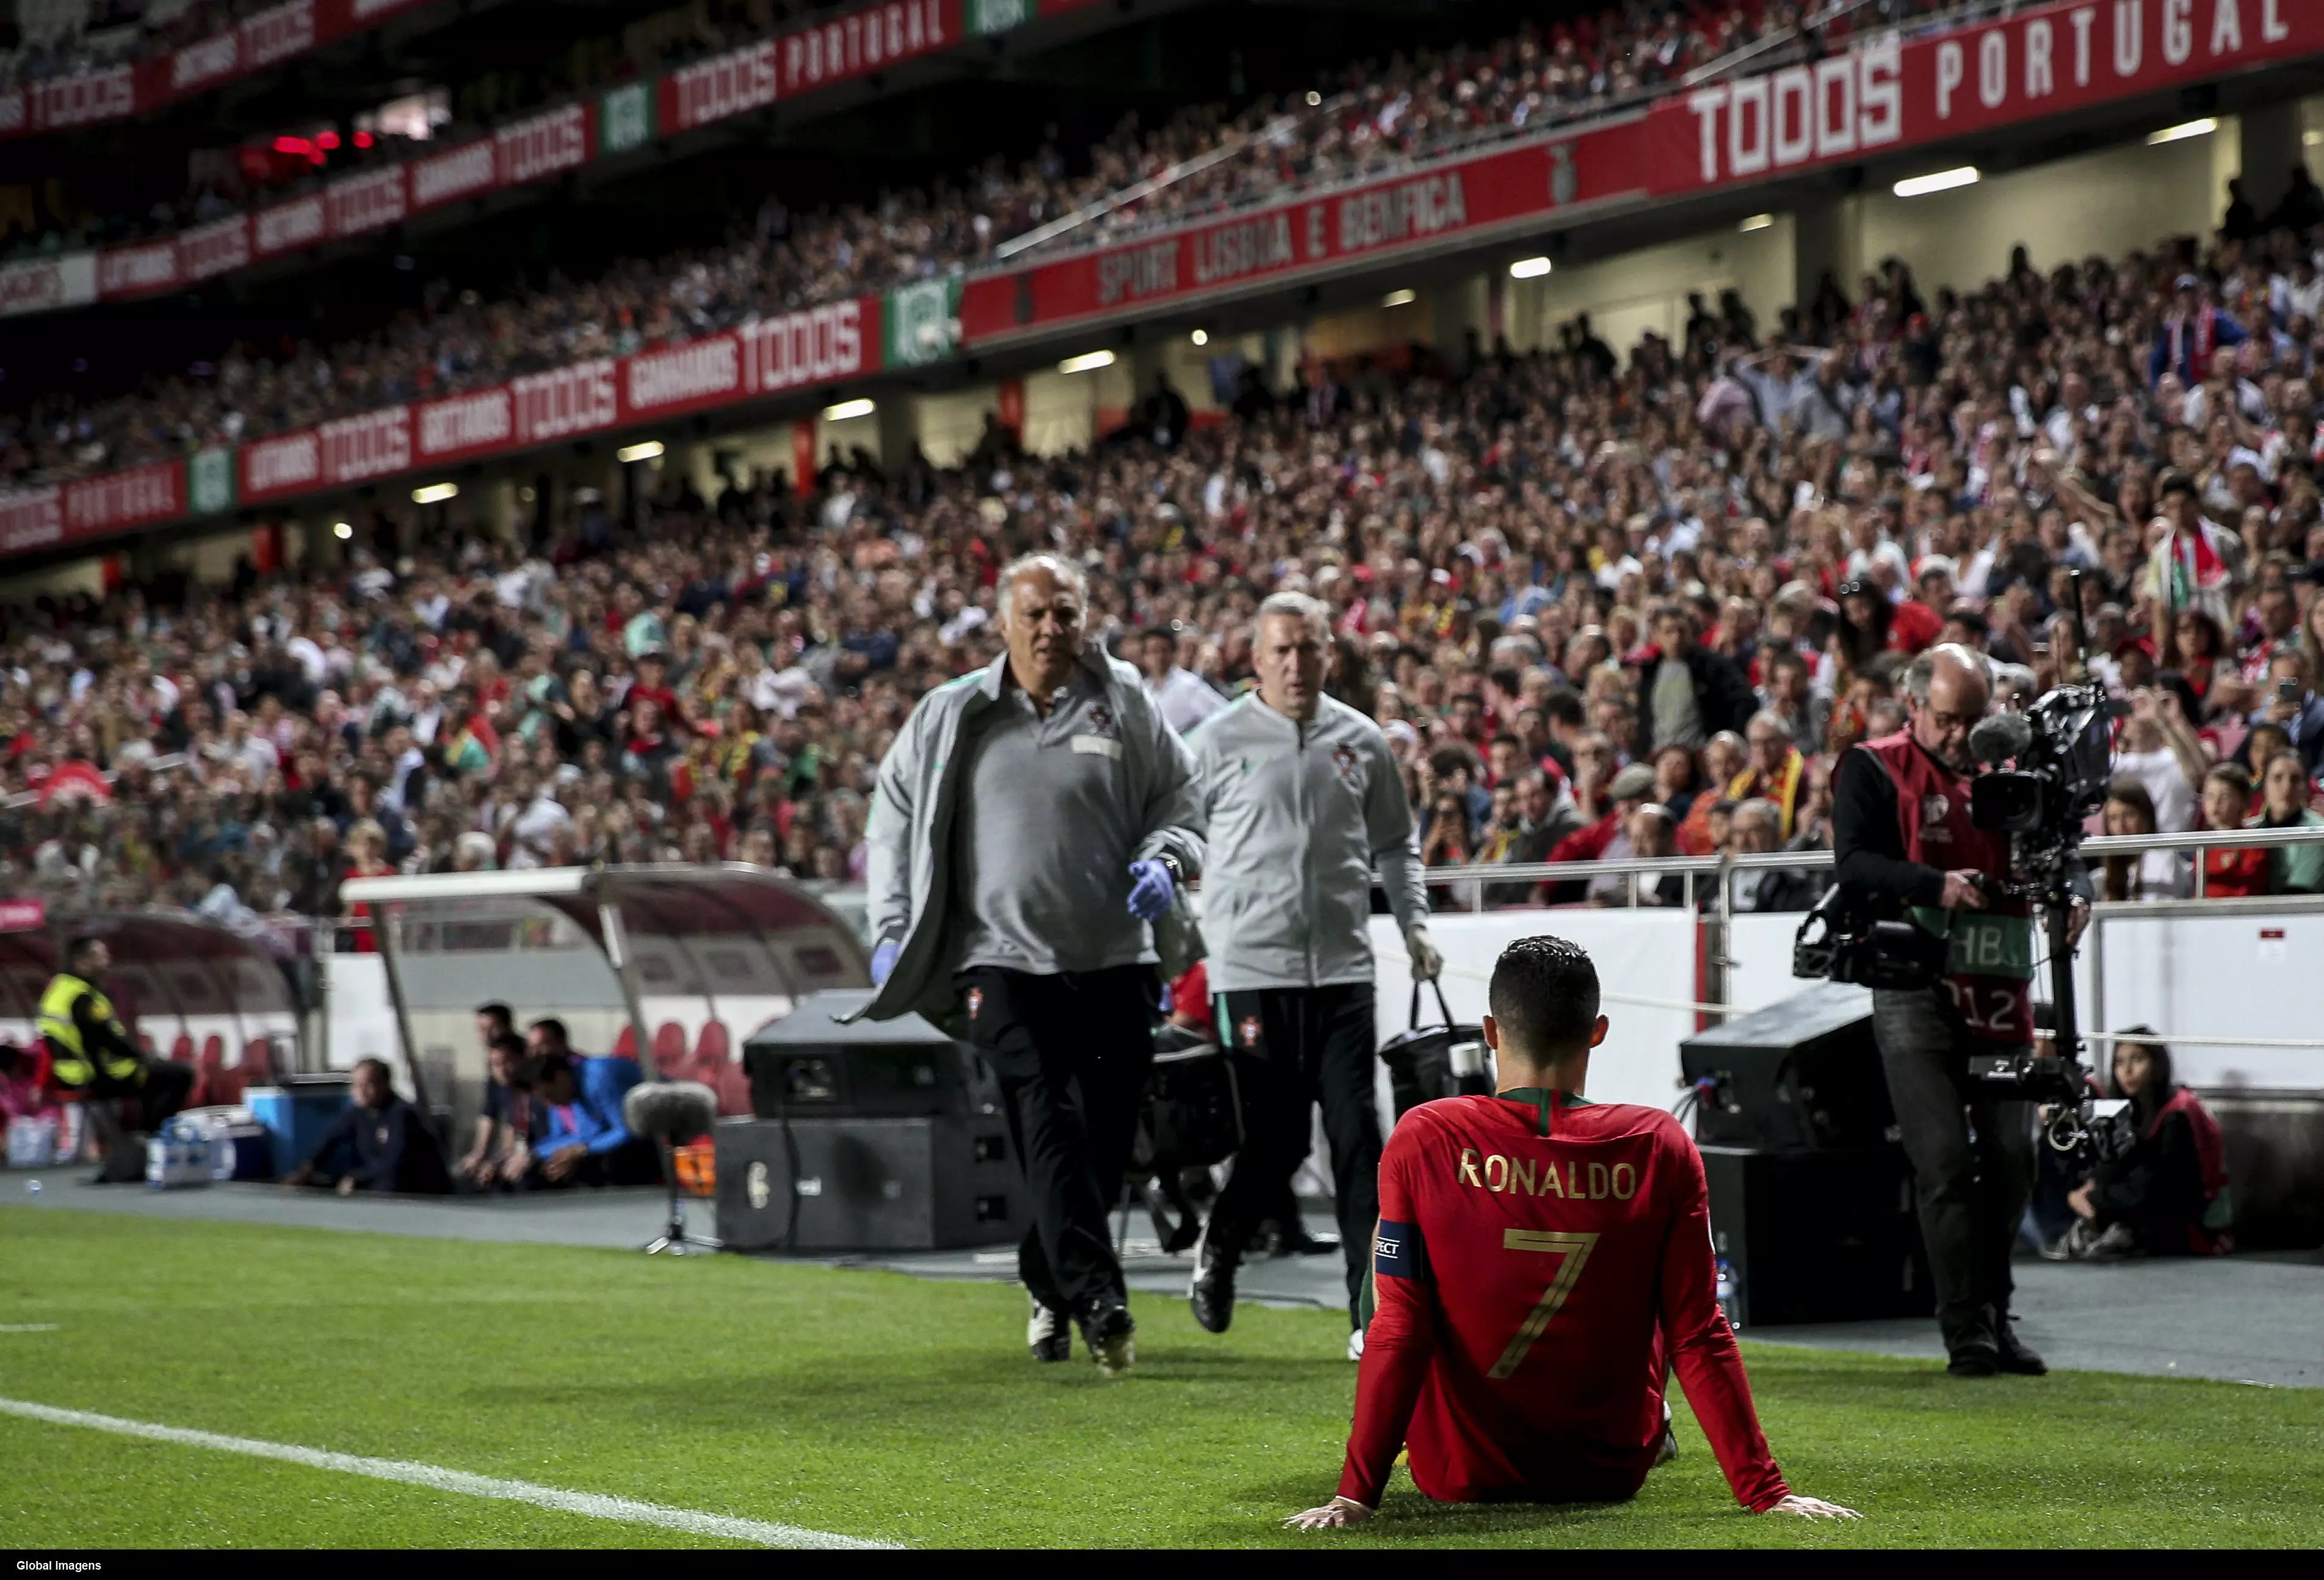 Ronaldo went off with a hamstring injury on Monday. Image: PA Images